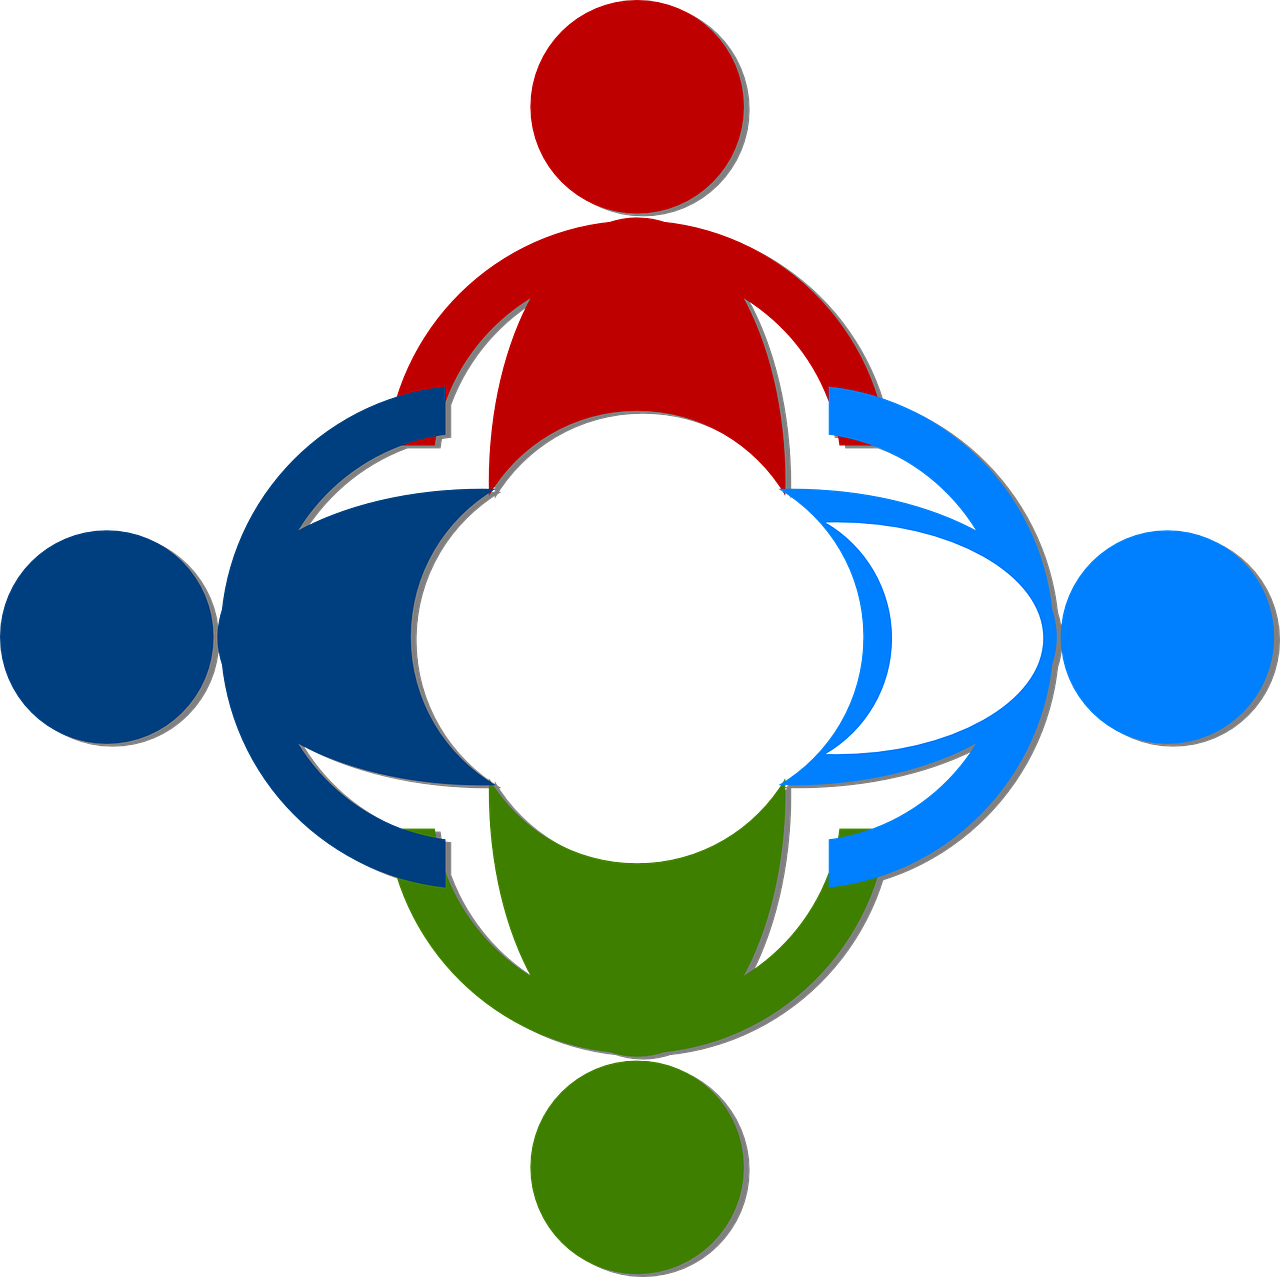 a group of people standing around each other, a digital rendering, by Leon Polk Smith, flickr, precisionism, circular logo, four arms, holding each other, green blue red colors